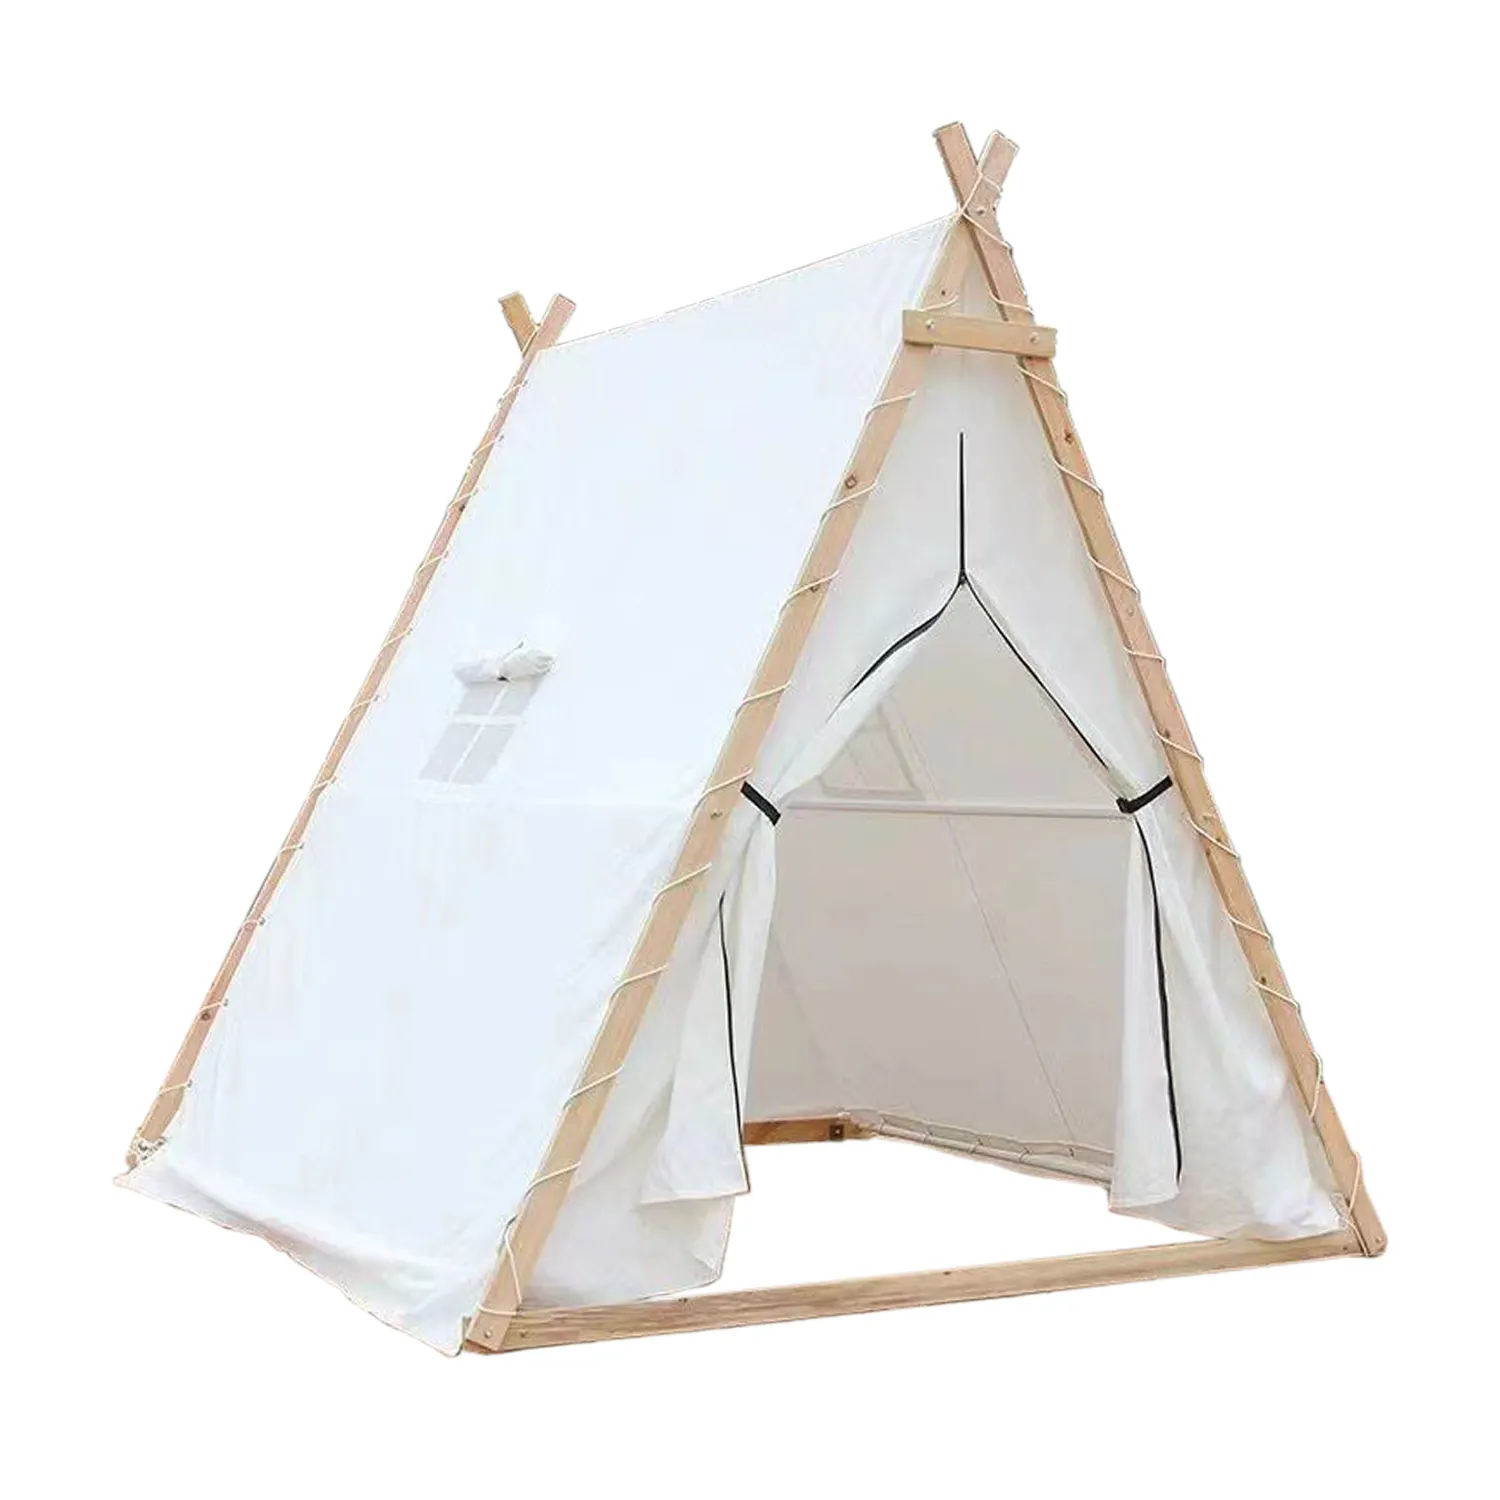 Luxury Camping Safari Tent with Wood Pole Frame Outdoor Triangular Safari Glamping Party Family Indian Tipi Tent